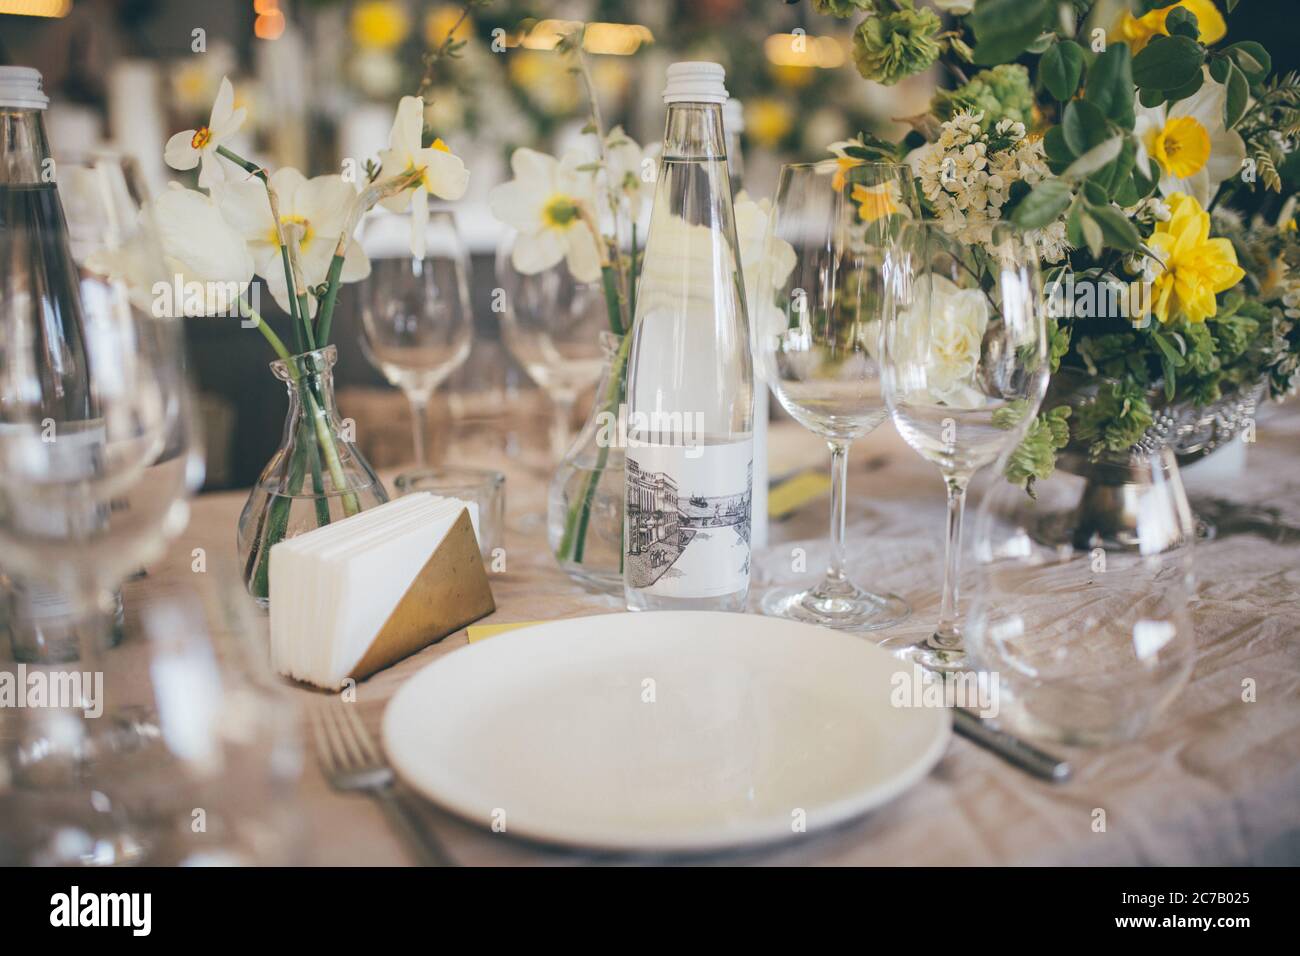 Beautiful served wedding table with decor as candles, flower arrangements. Banquet dinner party. Wine glasses, water Stock Photo